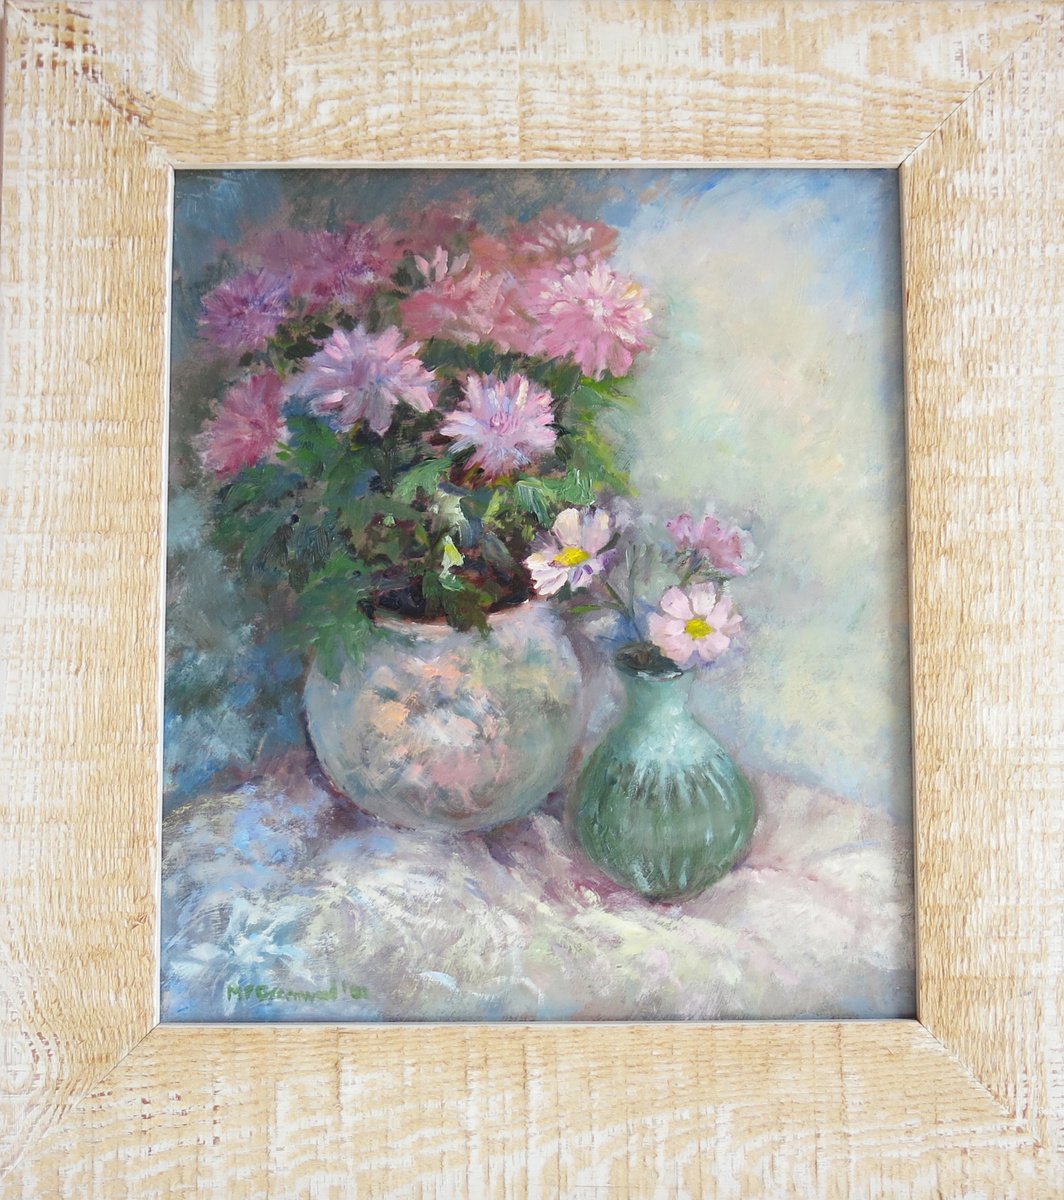 Chrysanthemums in a Bowl by Maureen Greenwood